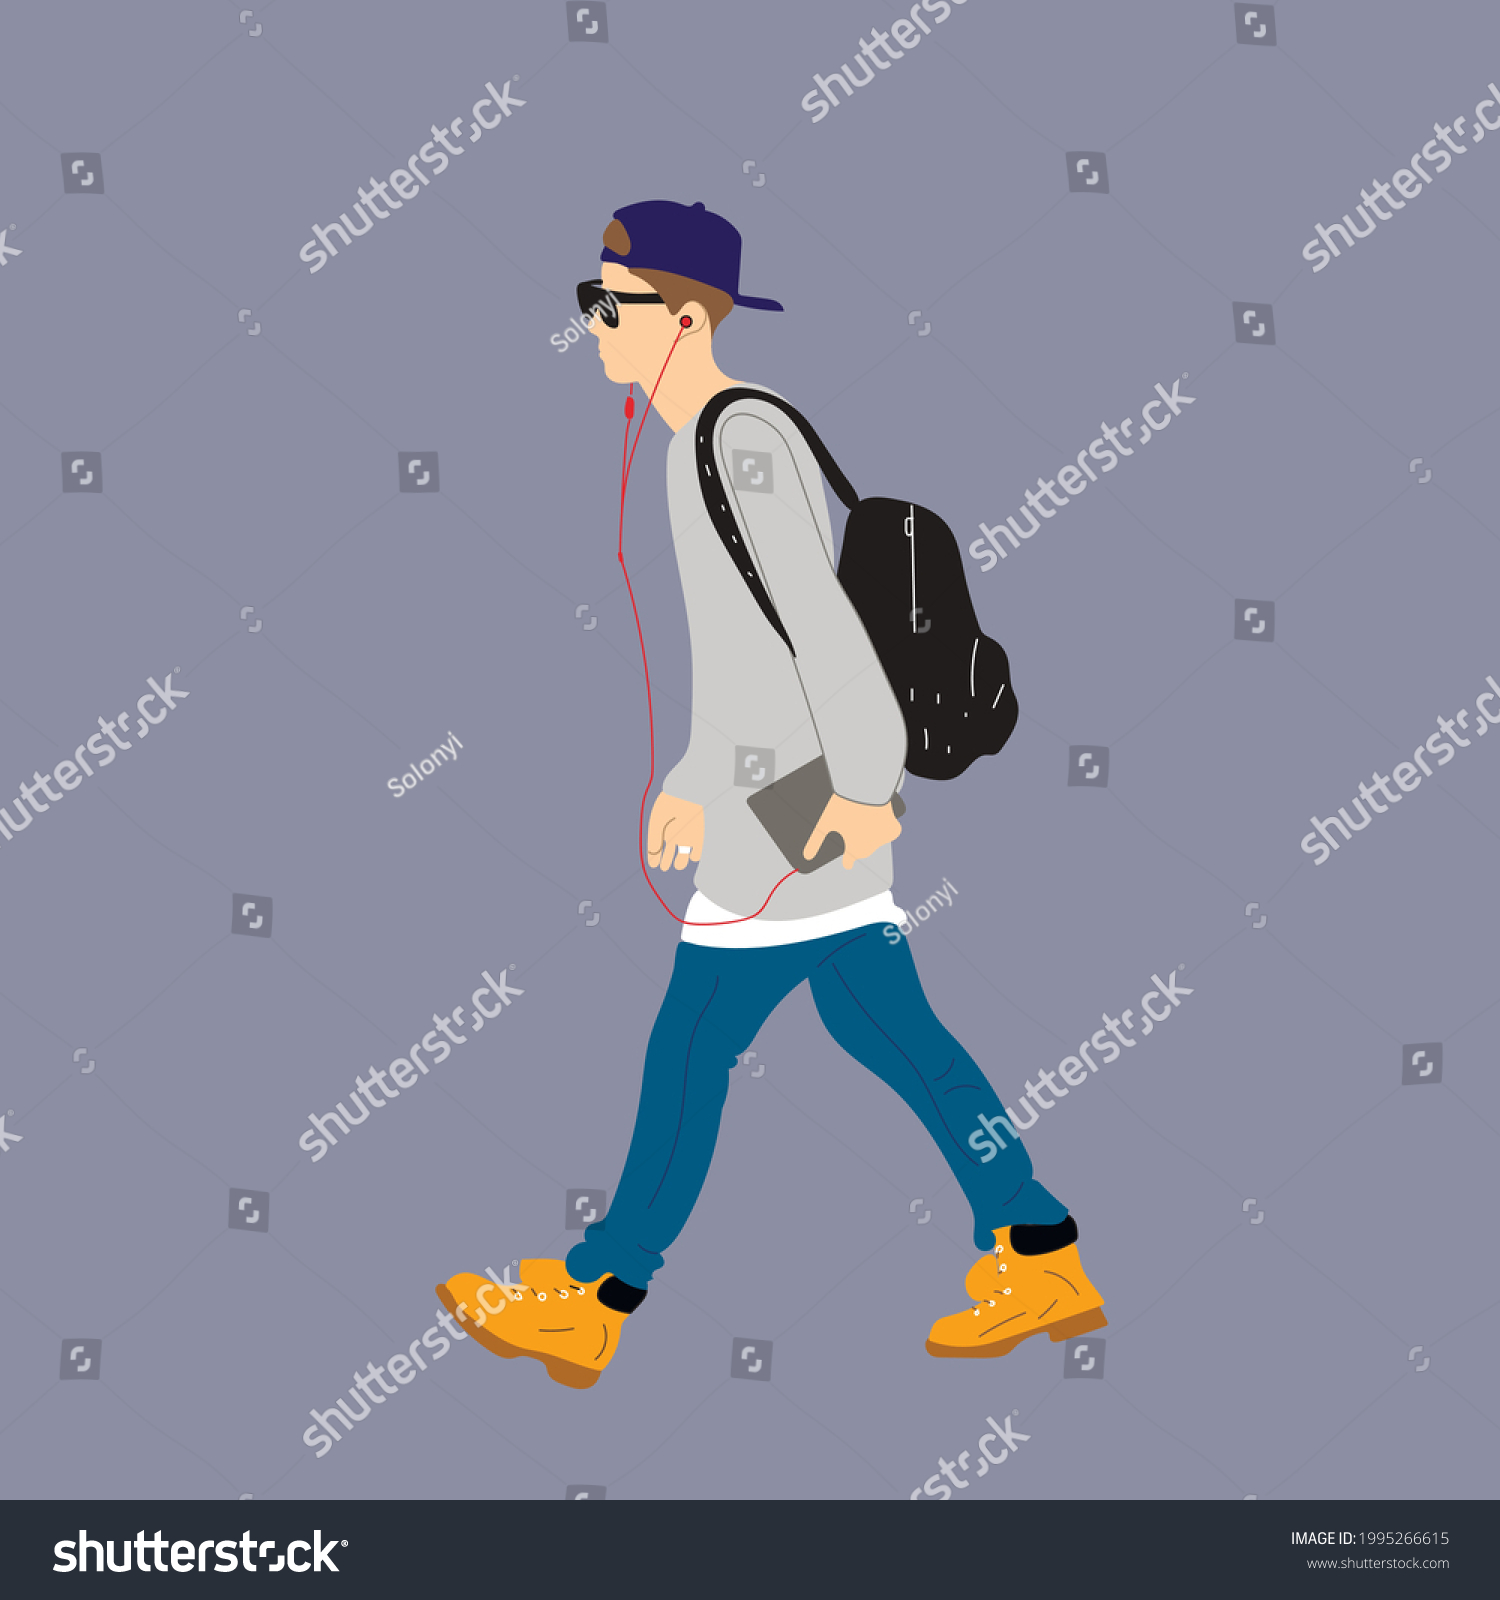 SVG of Vector illustration of Kpop street fashion. Street idols of Koreans. Kpop male idol fashion. A guy in blue jeans and a gray sweatshirt, a backpack on his back. svg